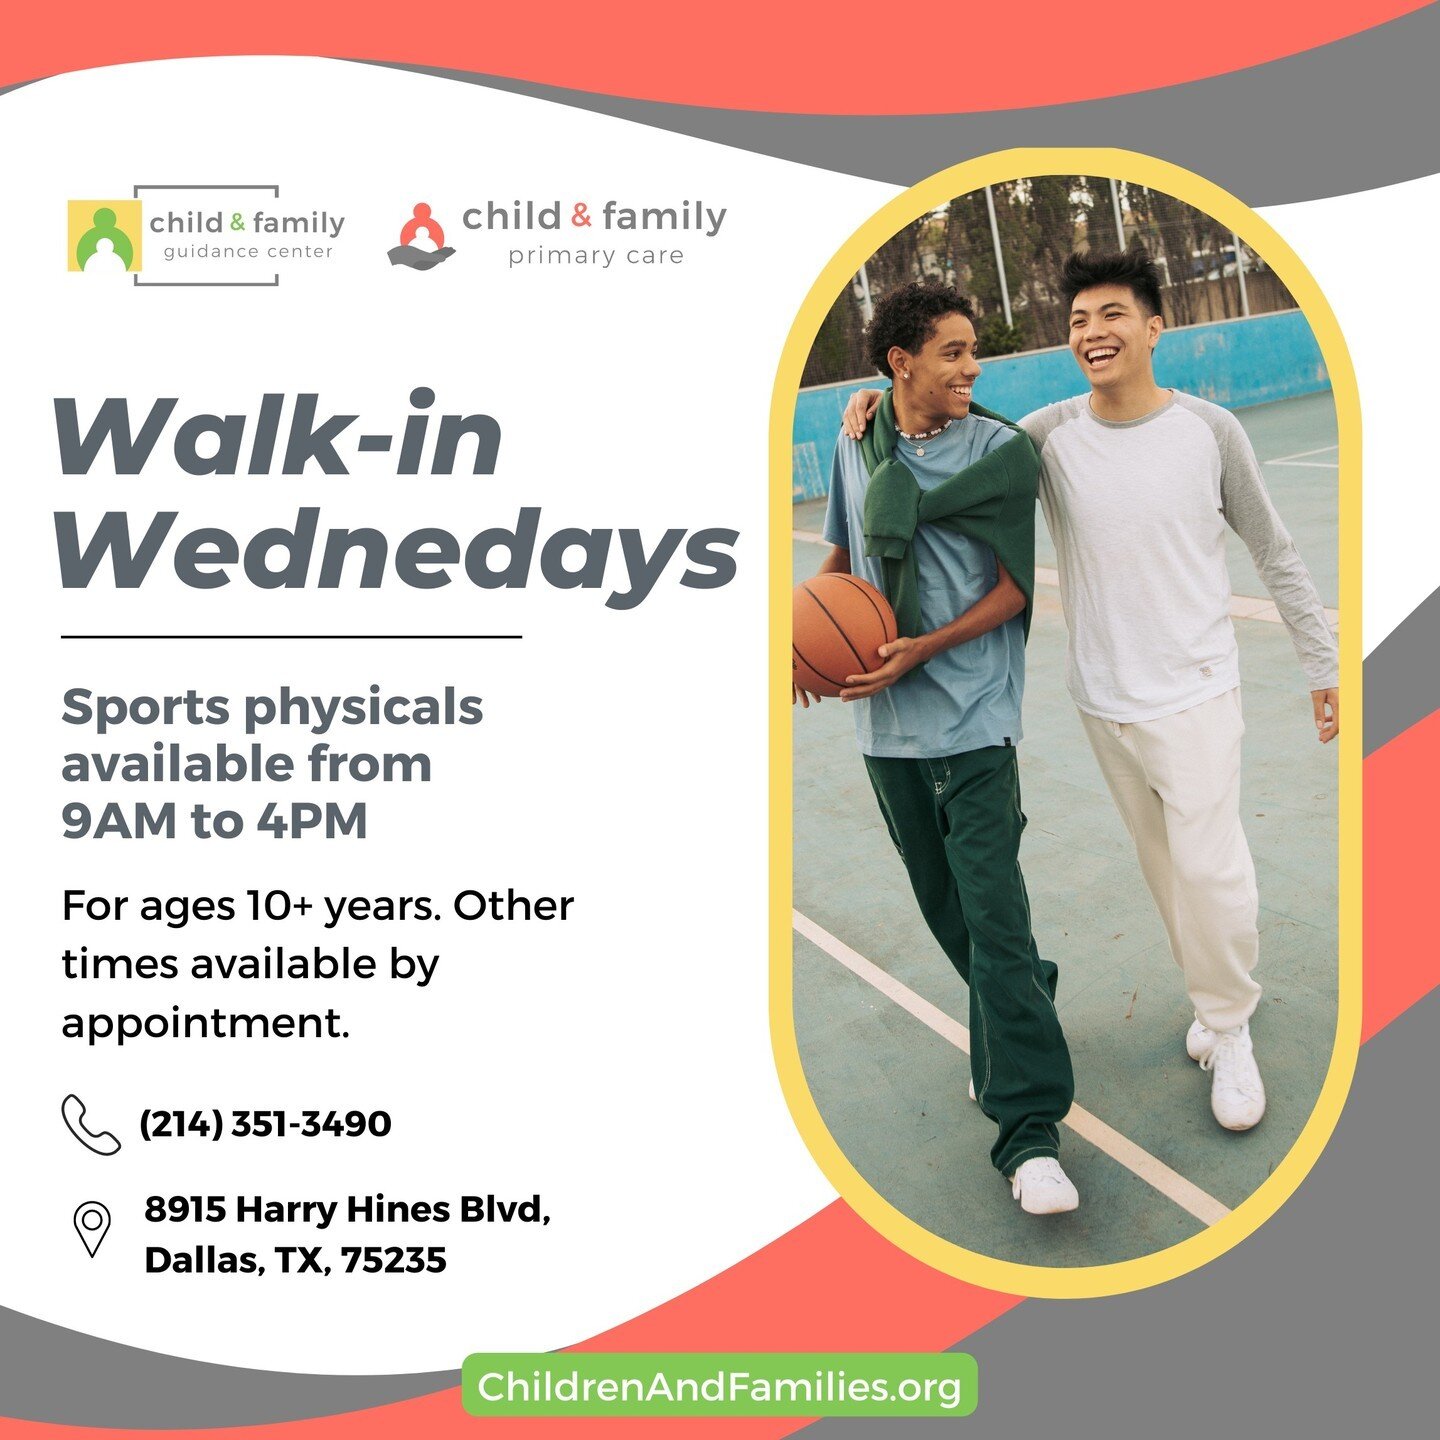 Every Wednesday, walk-ins are available from 9AM - 4PM for our $10 sports physicals! Other times are also available by appointment. If you have any questions, please message us or give us a call at 214.351.3490.